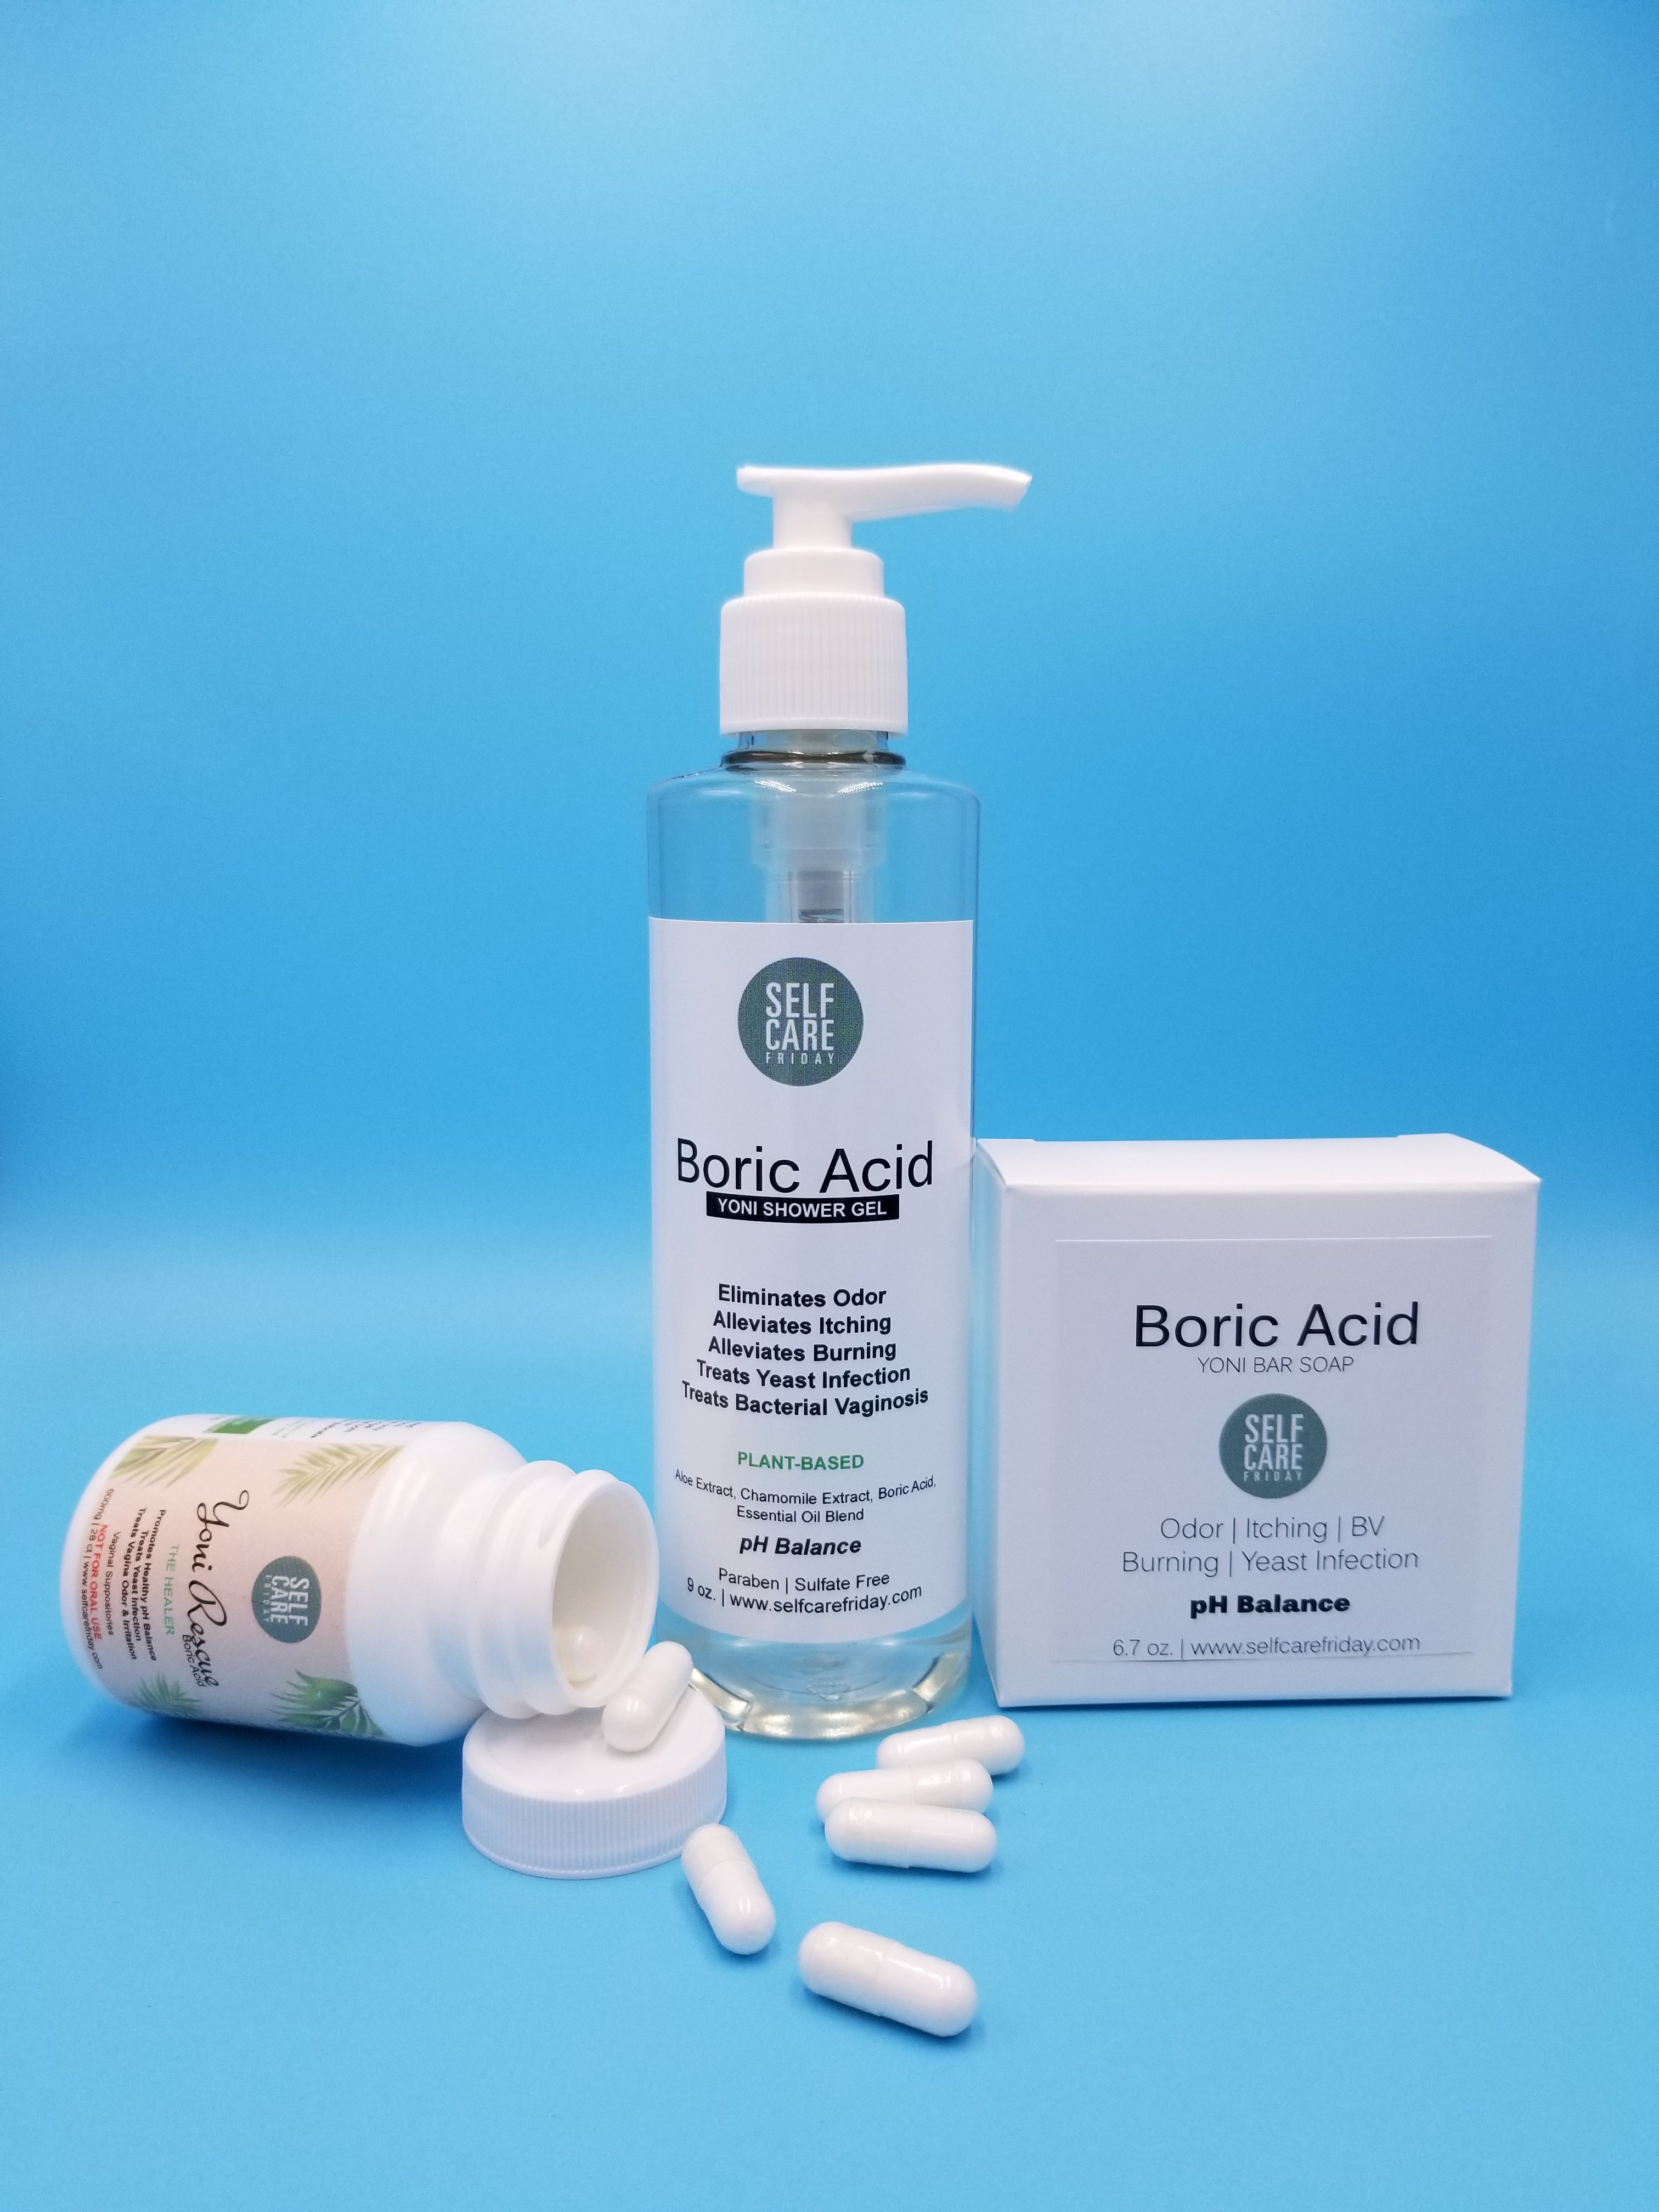 Bv And Yeast Infection Treatment Vaginal Health Boric Acid Bundle